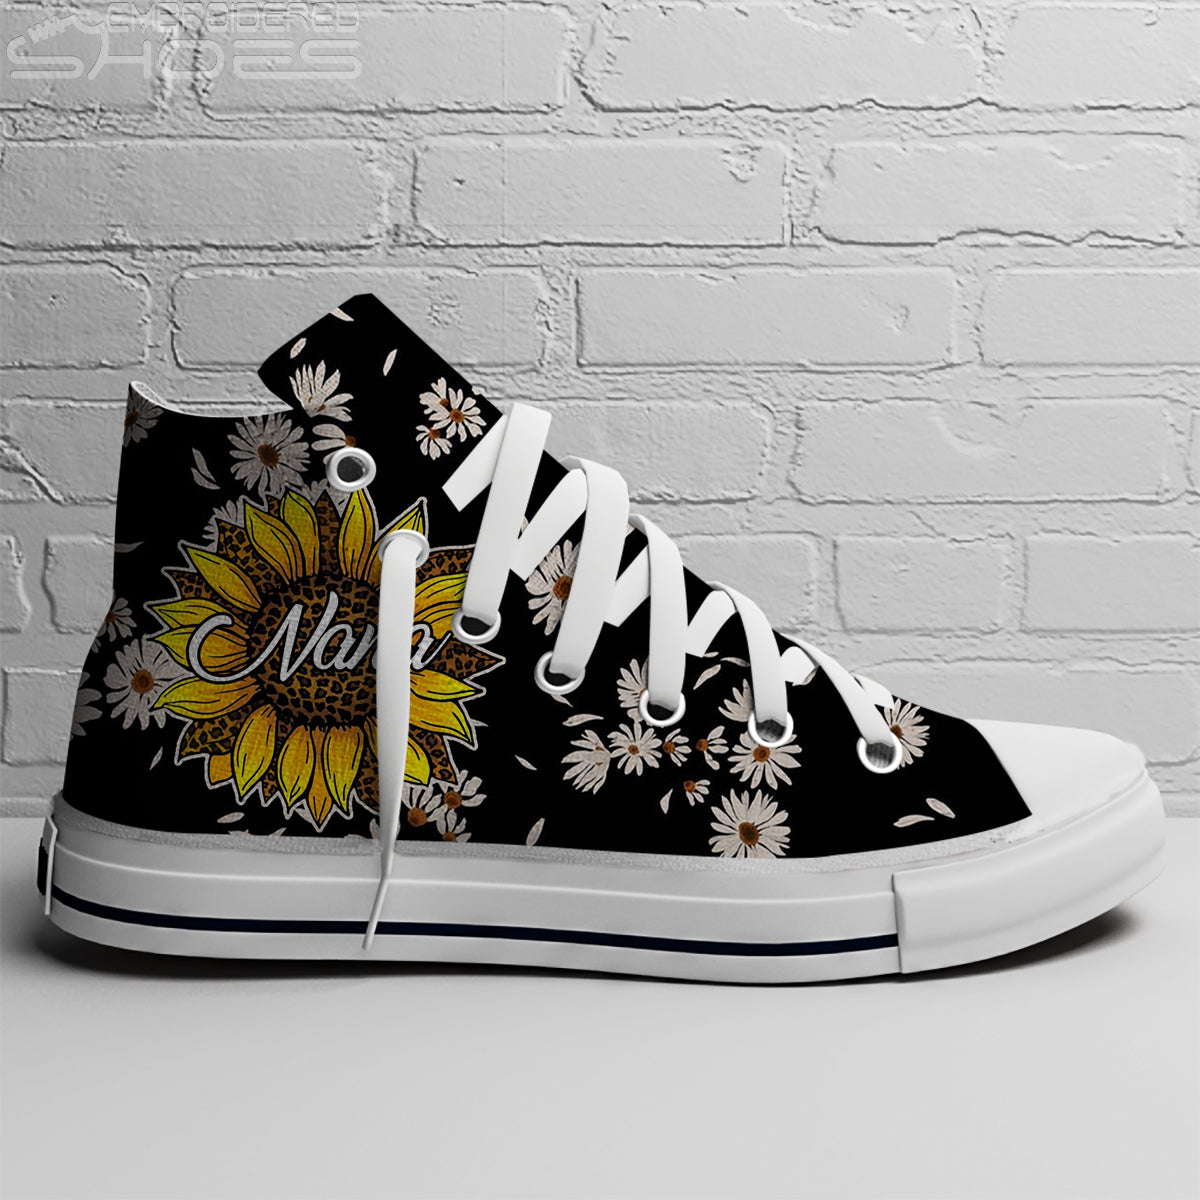 EShoes Personalized Sunflower Women's Canvas Shoes, Daisy Flower Shoes, Personalized Shoes. Custom Name